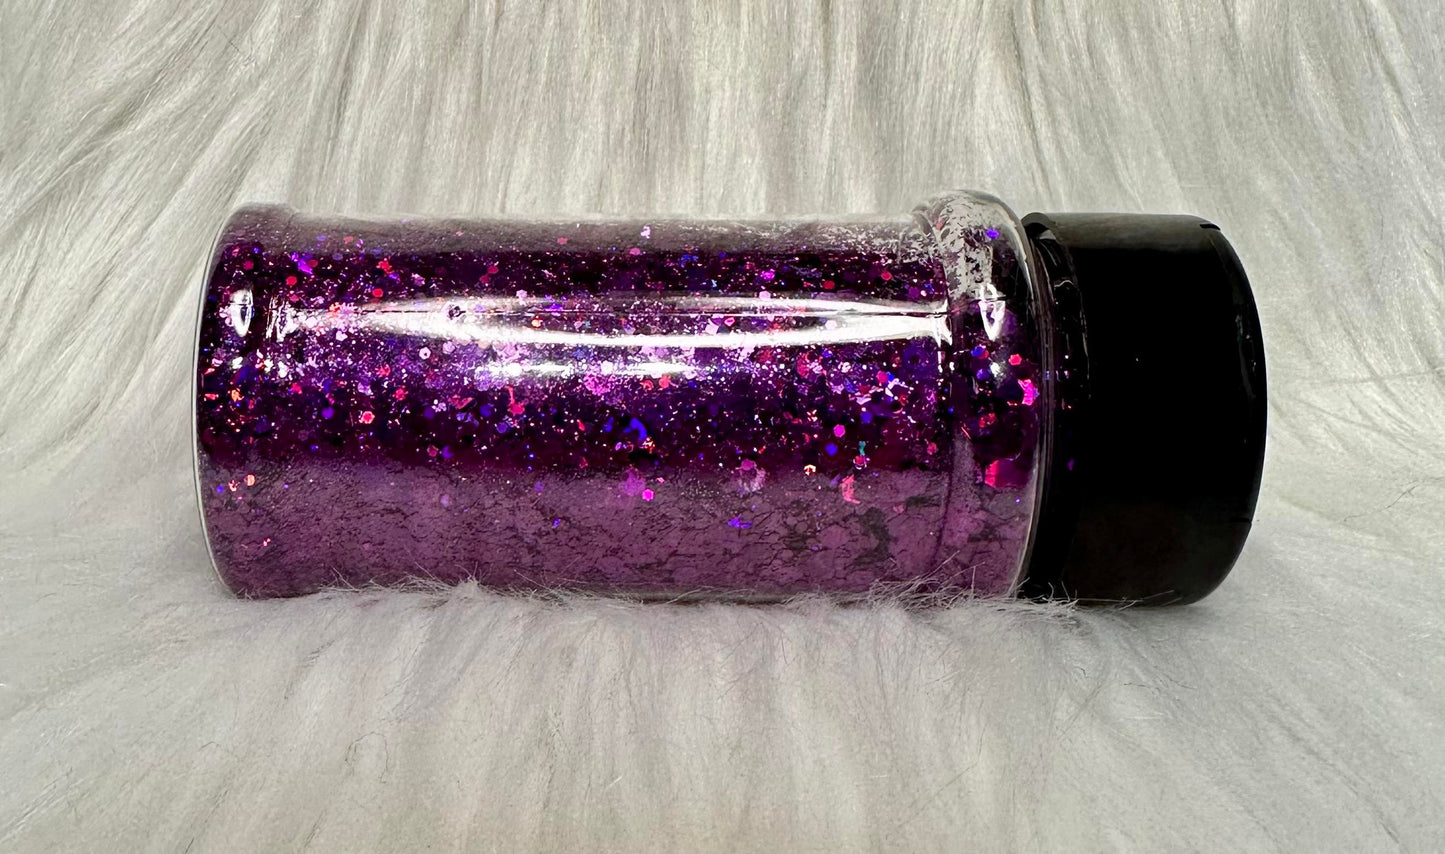 Sweet Surprises Holographic Chunky Mix Glitter